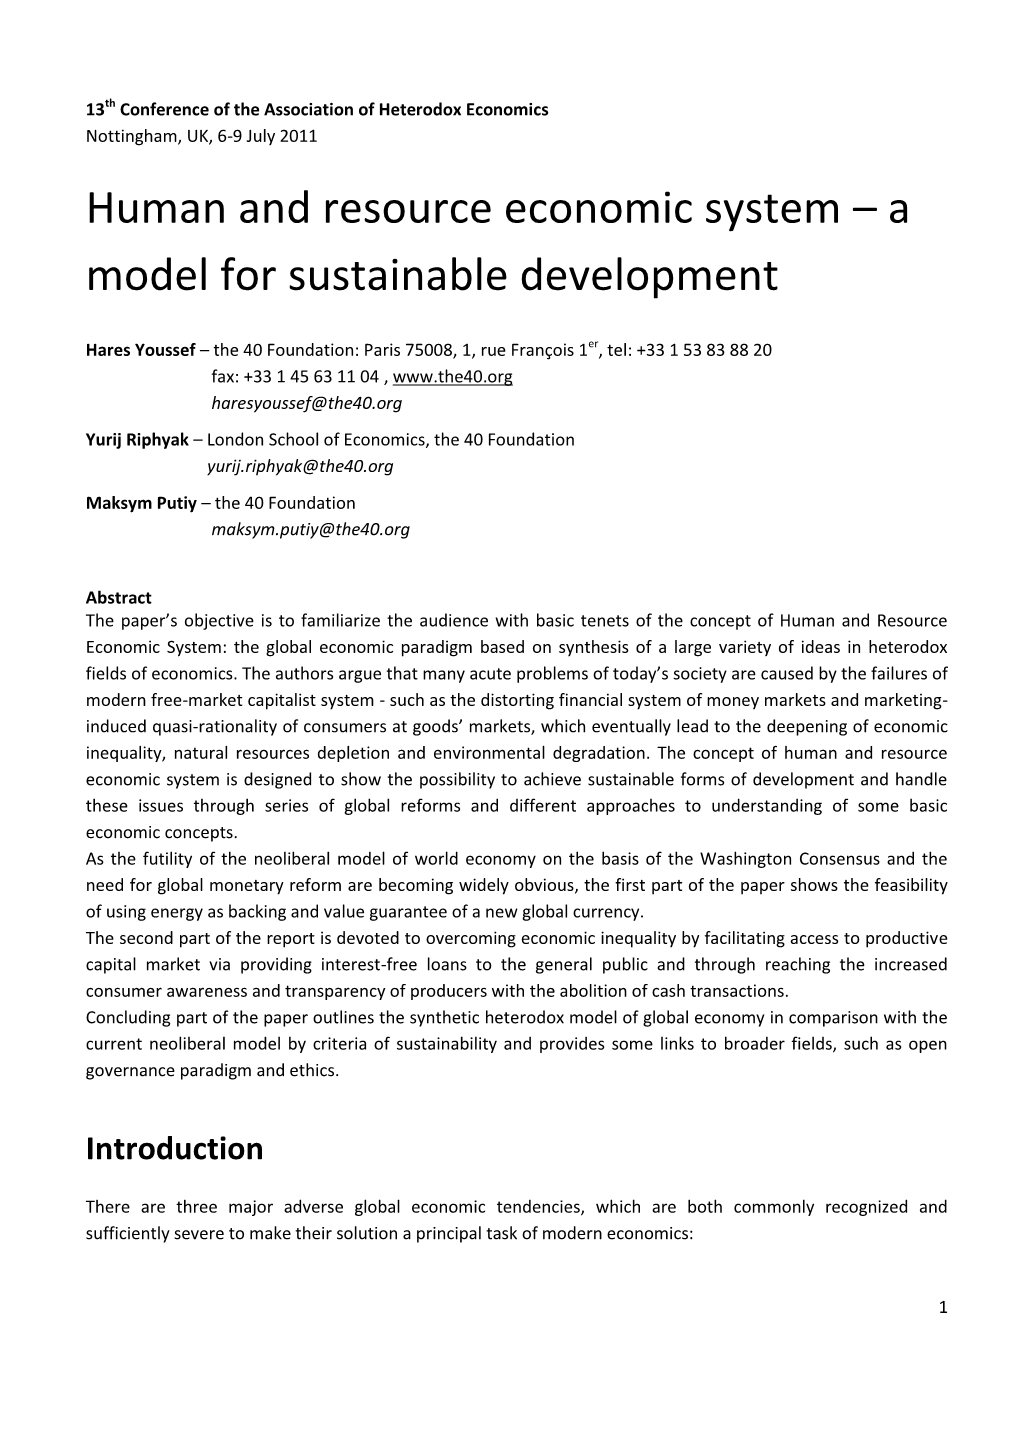 Human and Resource Economic System – a Model for Sustainable Development